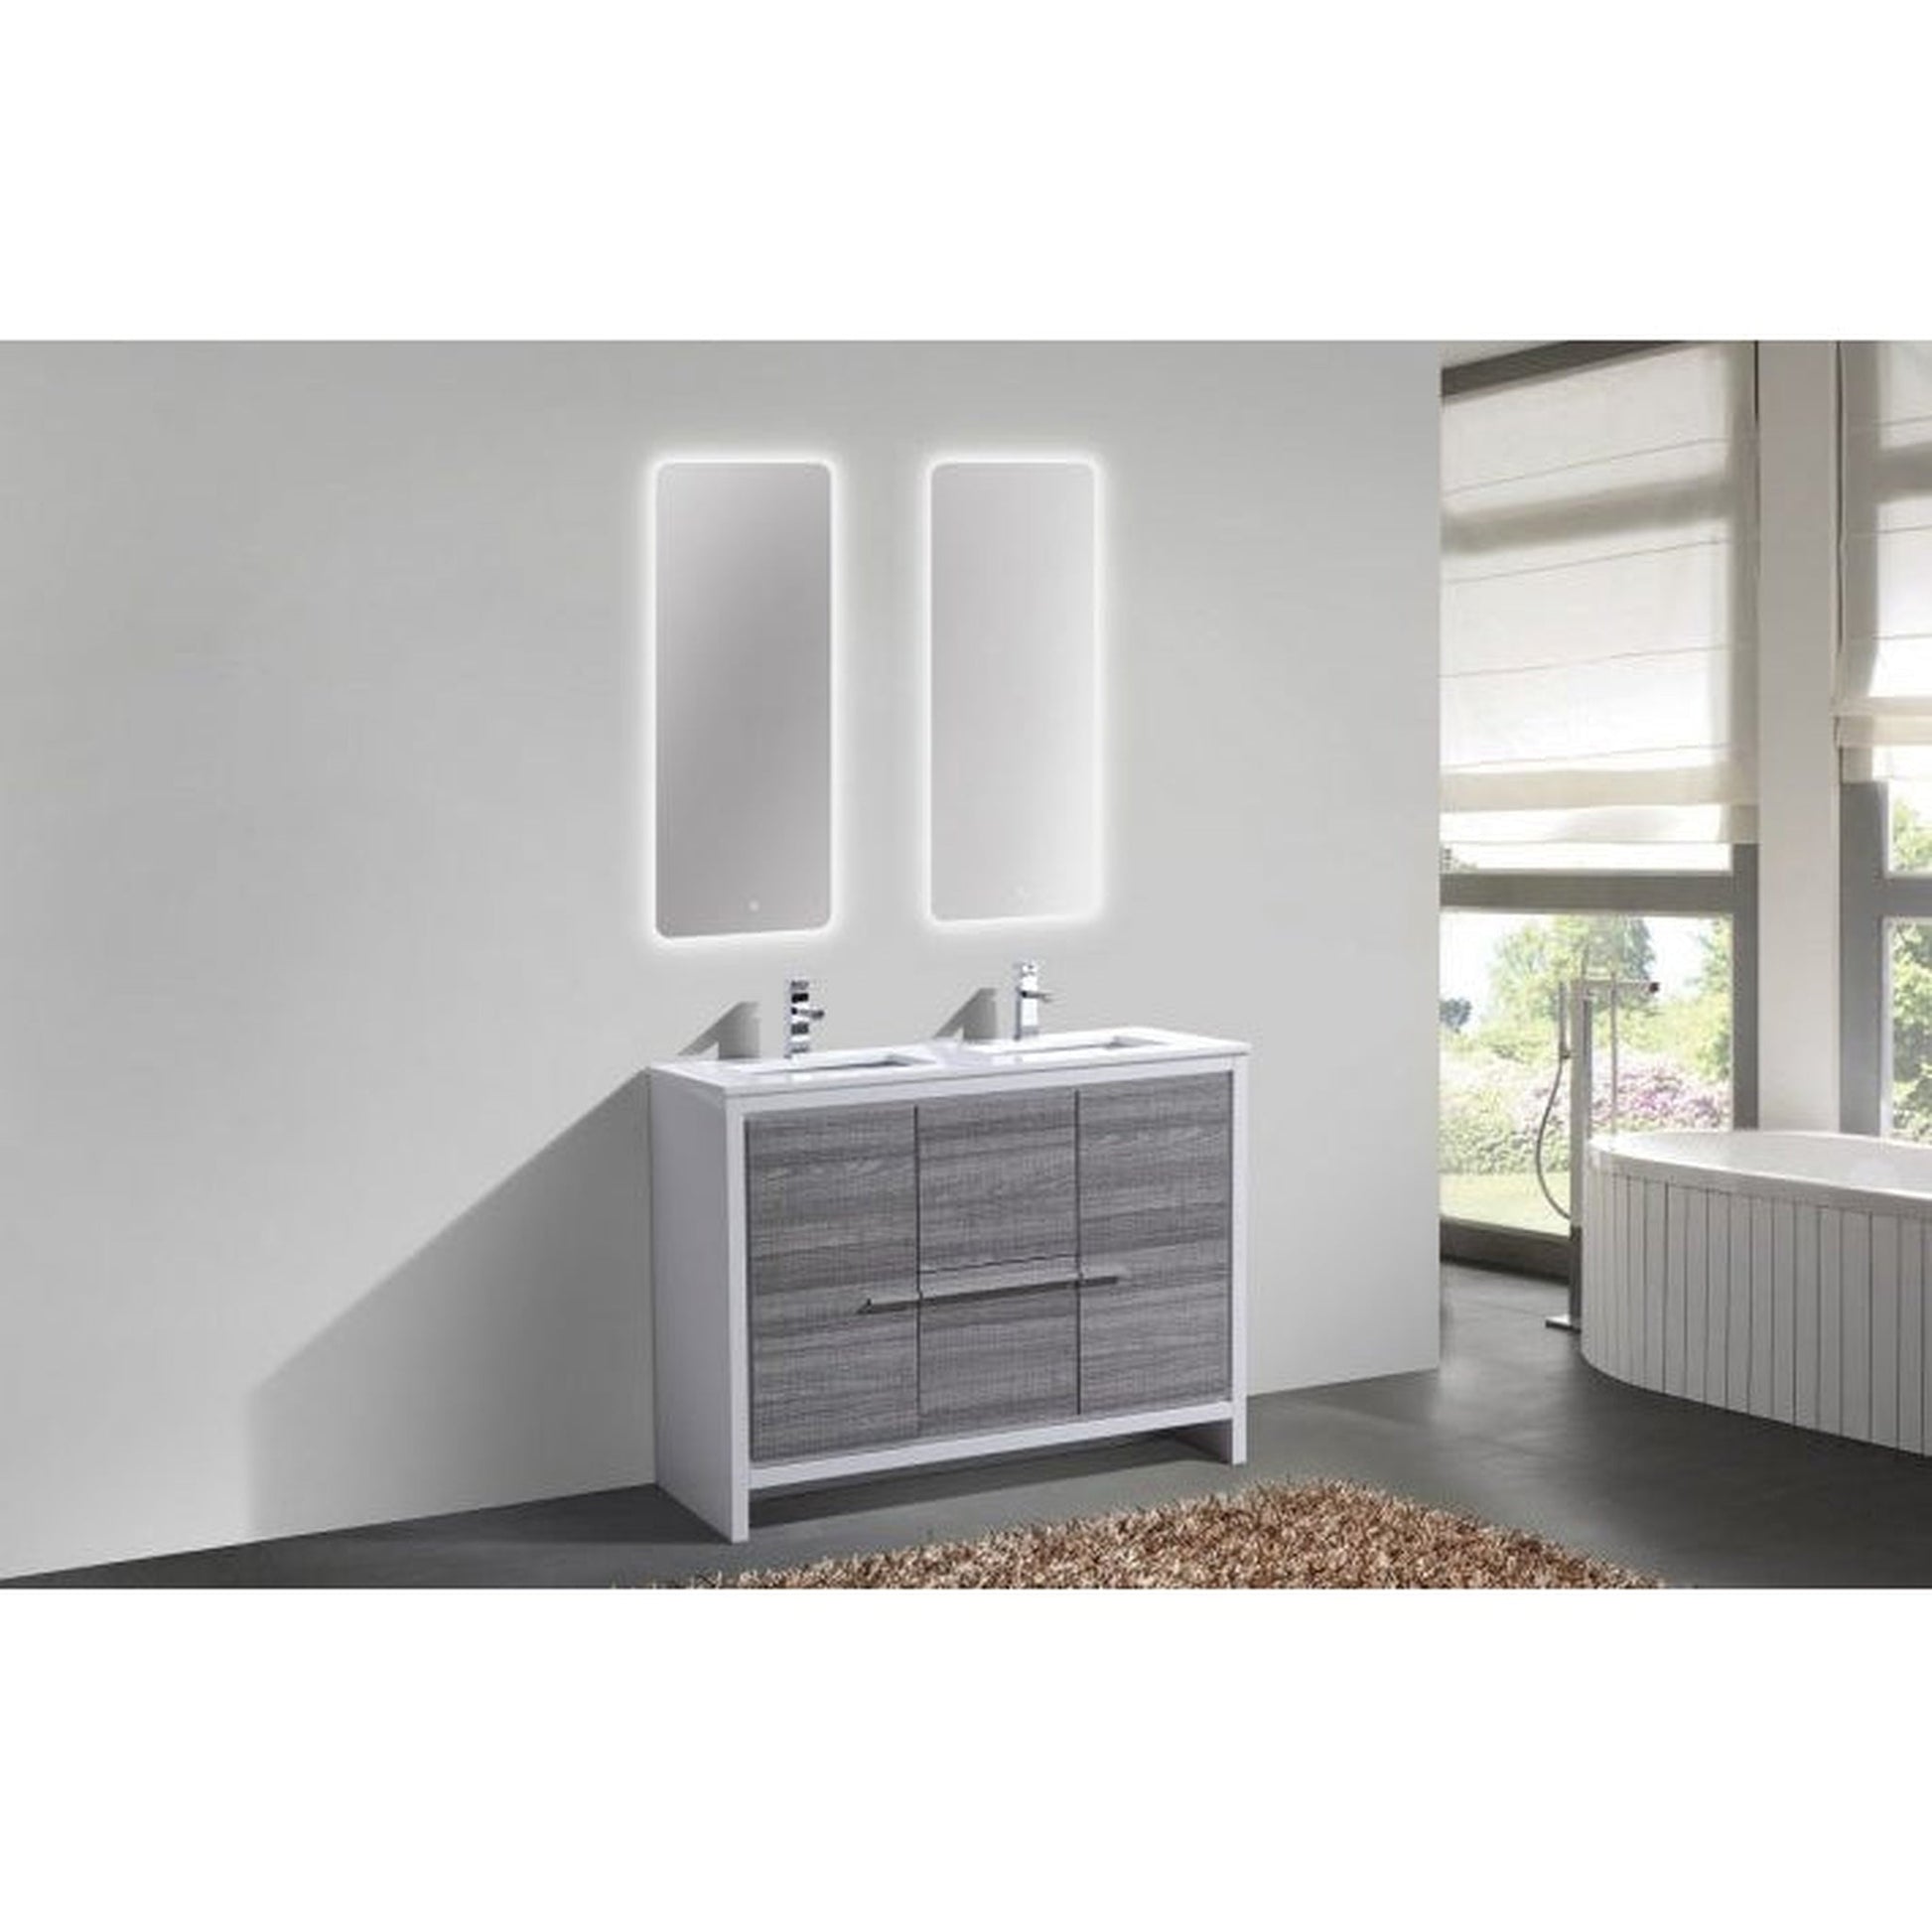 KubeBath Dolce 48" Ash Gray Freestanding Modern Bathroom Vanity With Quartz Vanity Top & Ceramic Double Sink With Overflow and 48" White Framed Mirror With Shelf